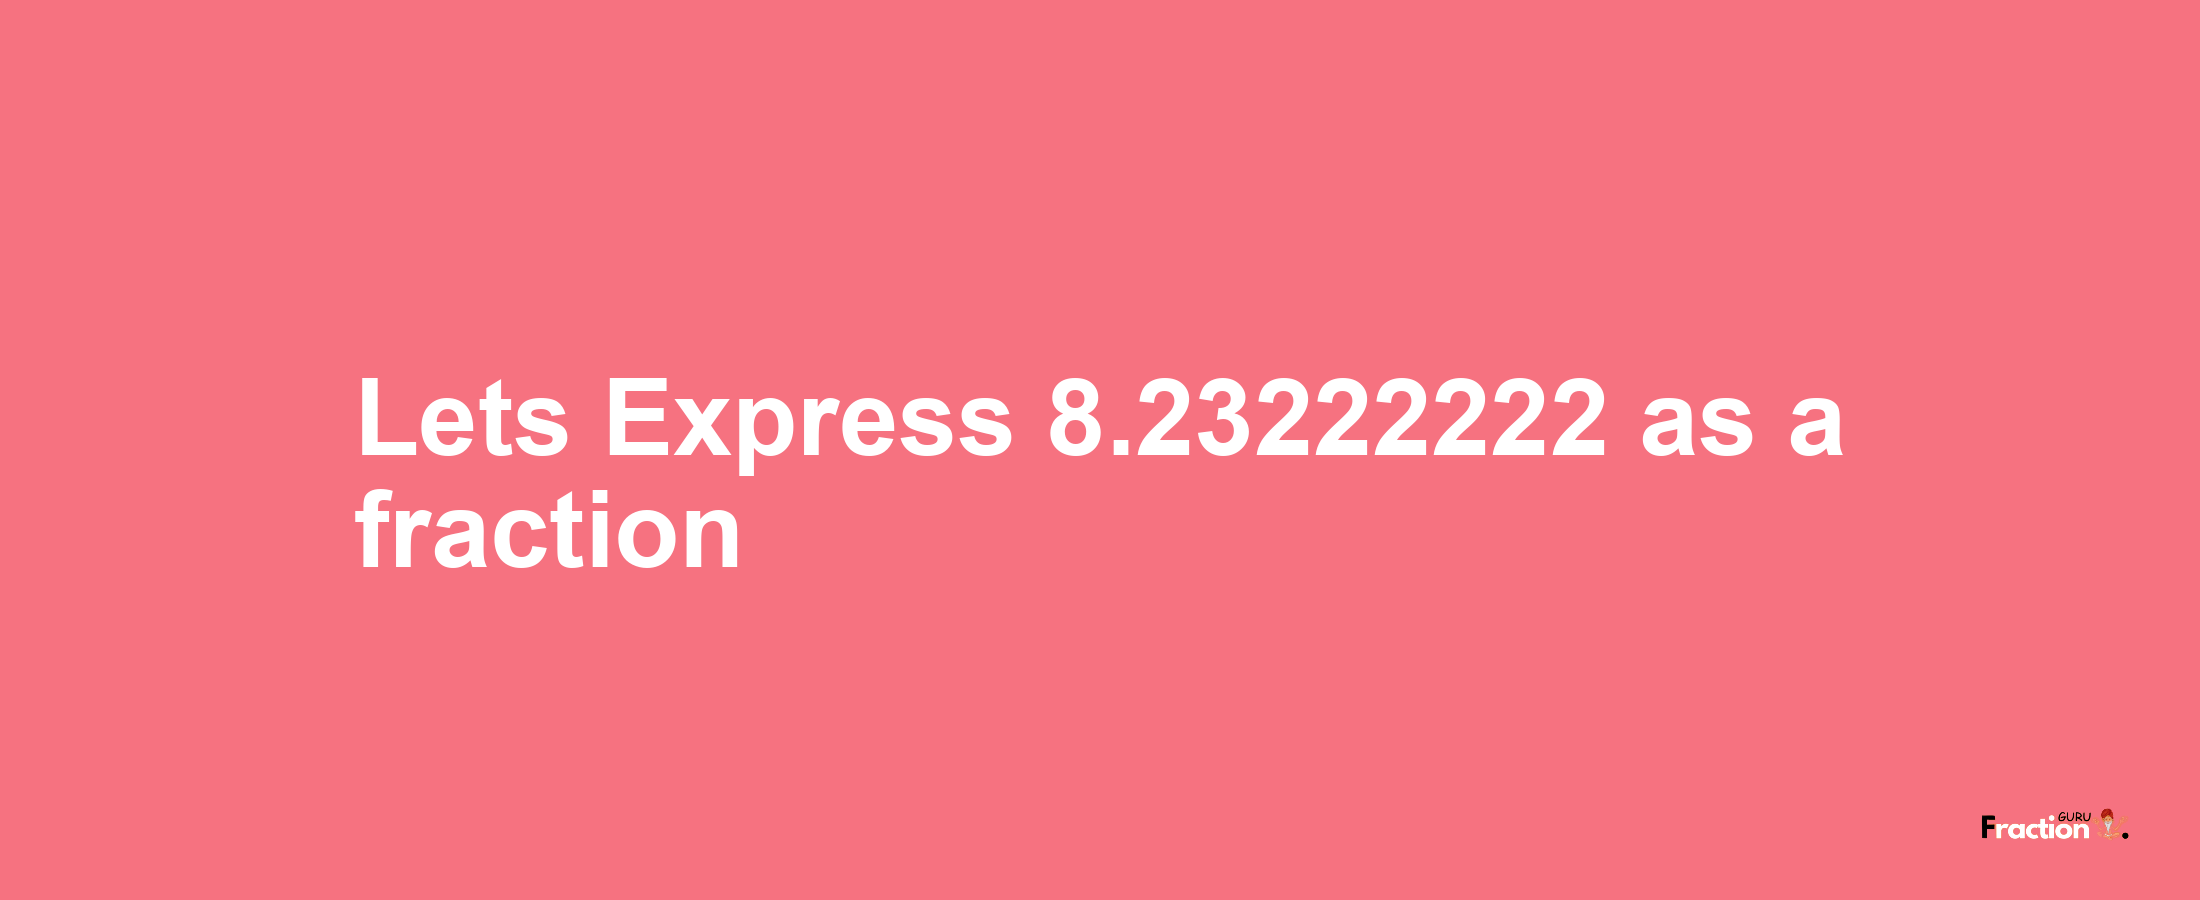 Lets Express 8.23222222 as afraction